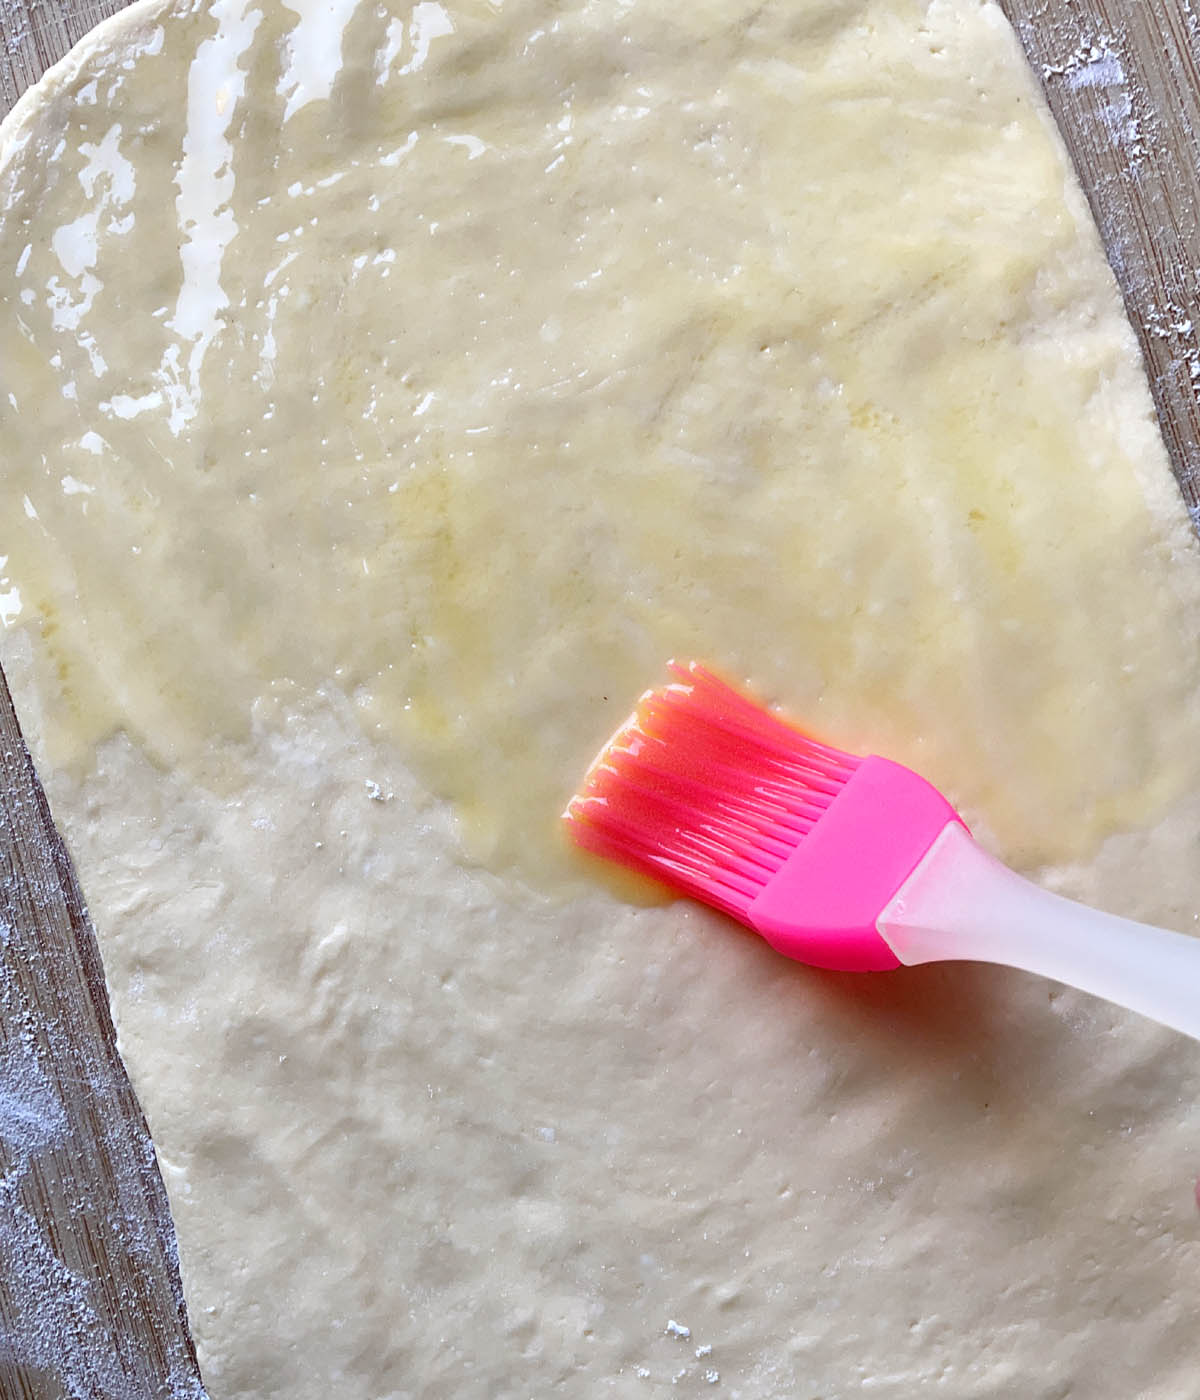 A pink brush brushing melted butter on rectangular shaped dough.